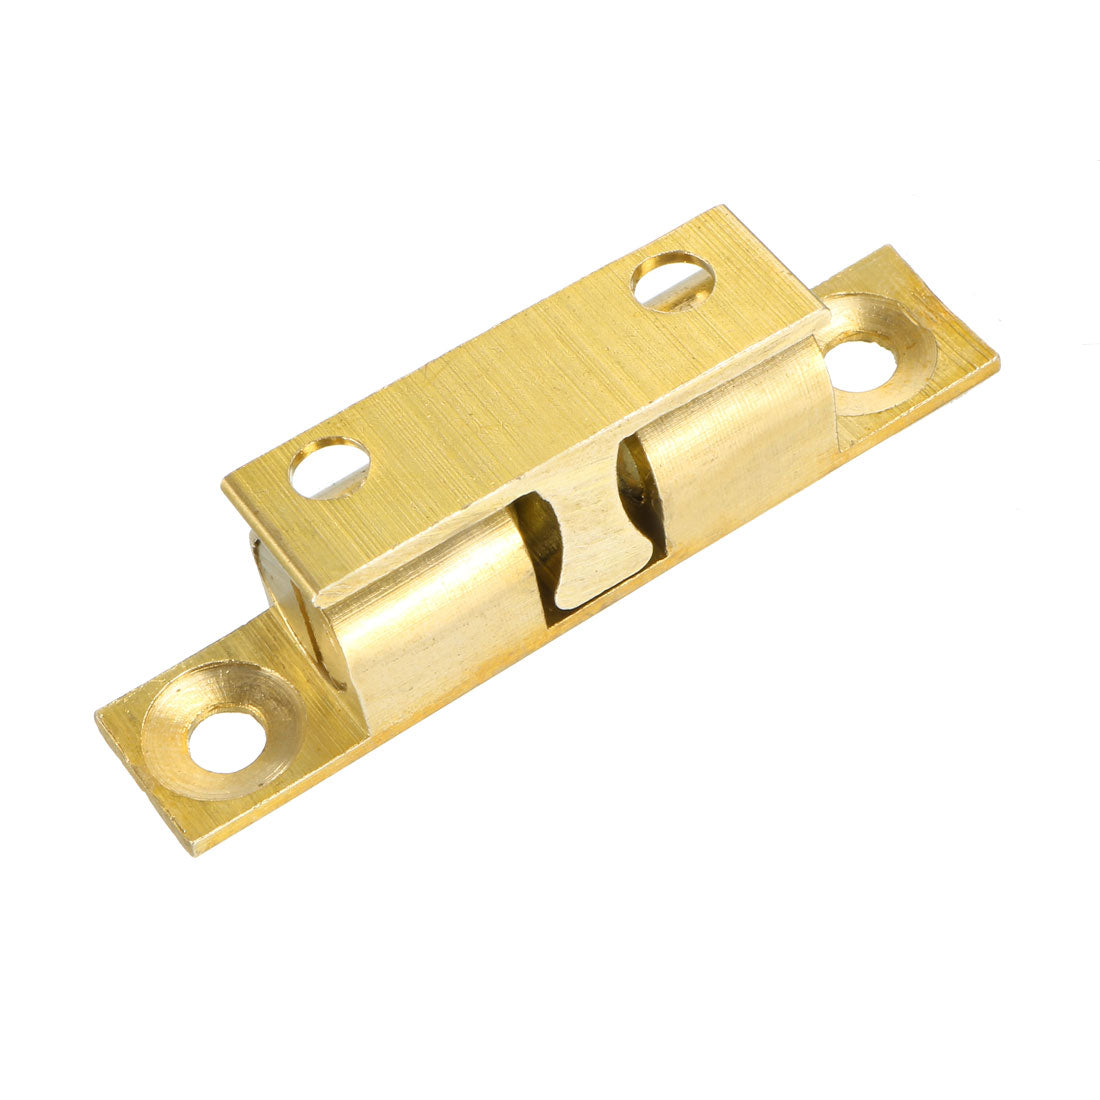 uxcell Uxcell Cabinet Door Closet Brass Double Ball Catch Tension Latch 50mm L Gold Tone